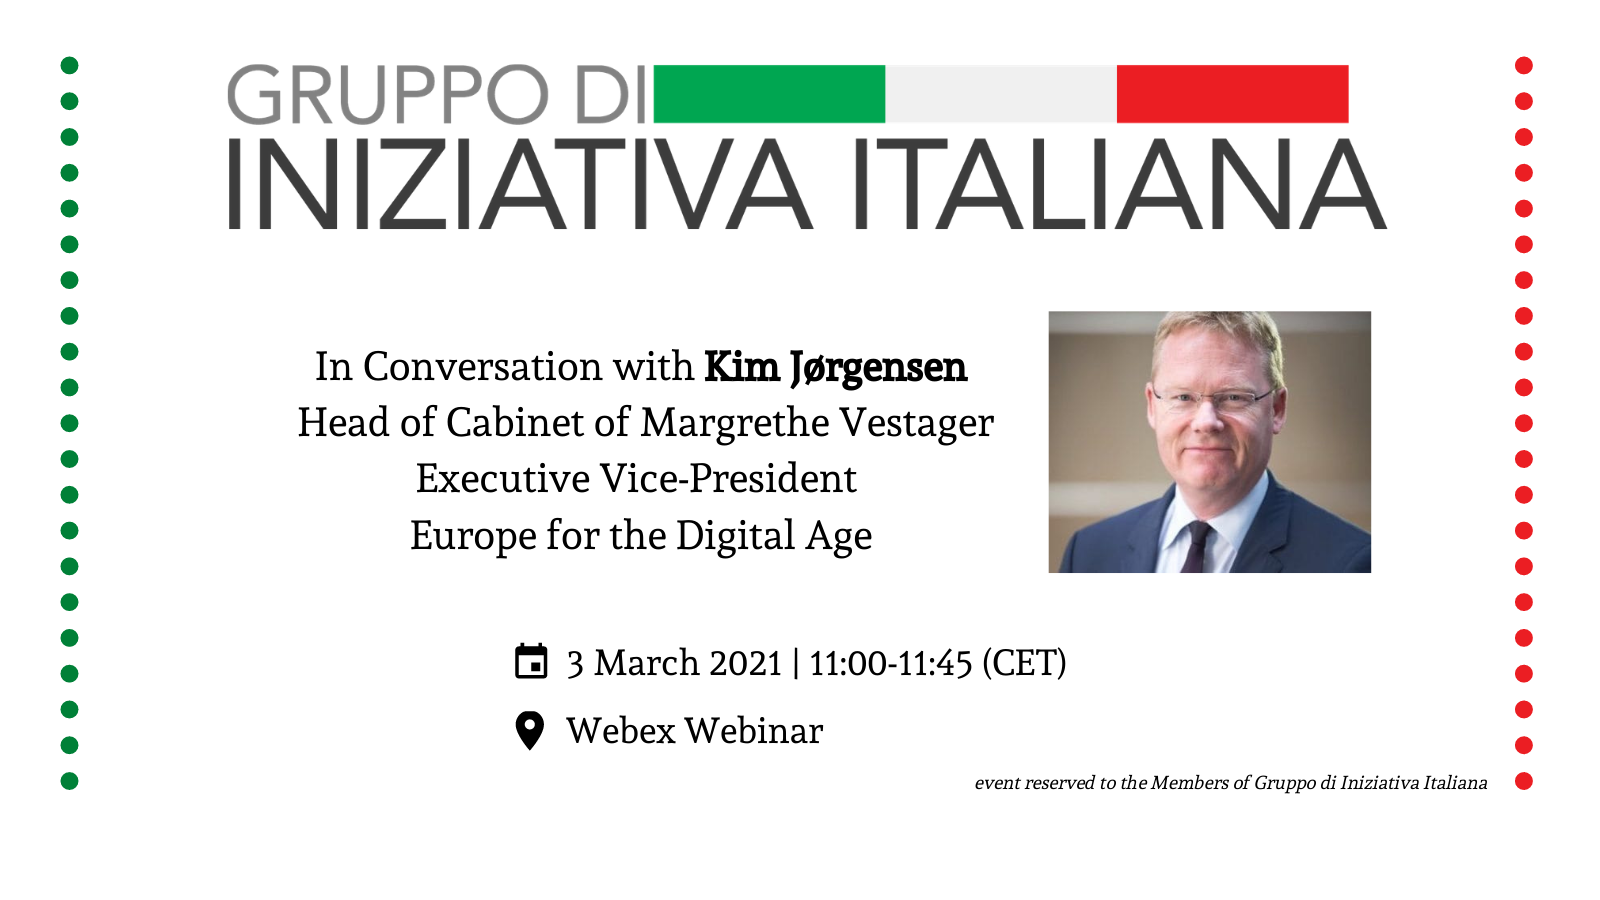 In Conversation with Kim Jørgensen|Europe for the Digital Age